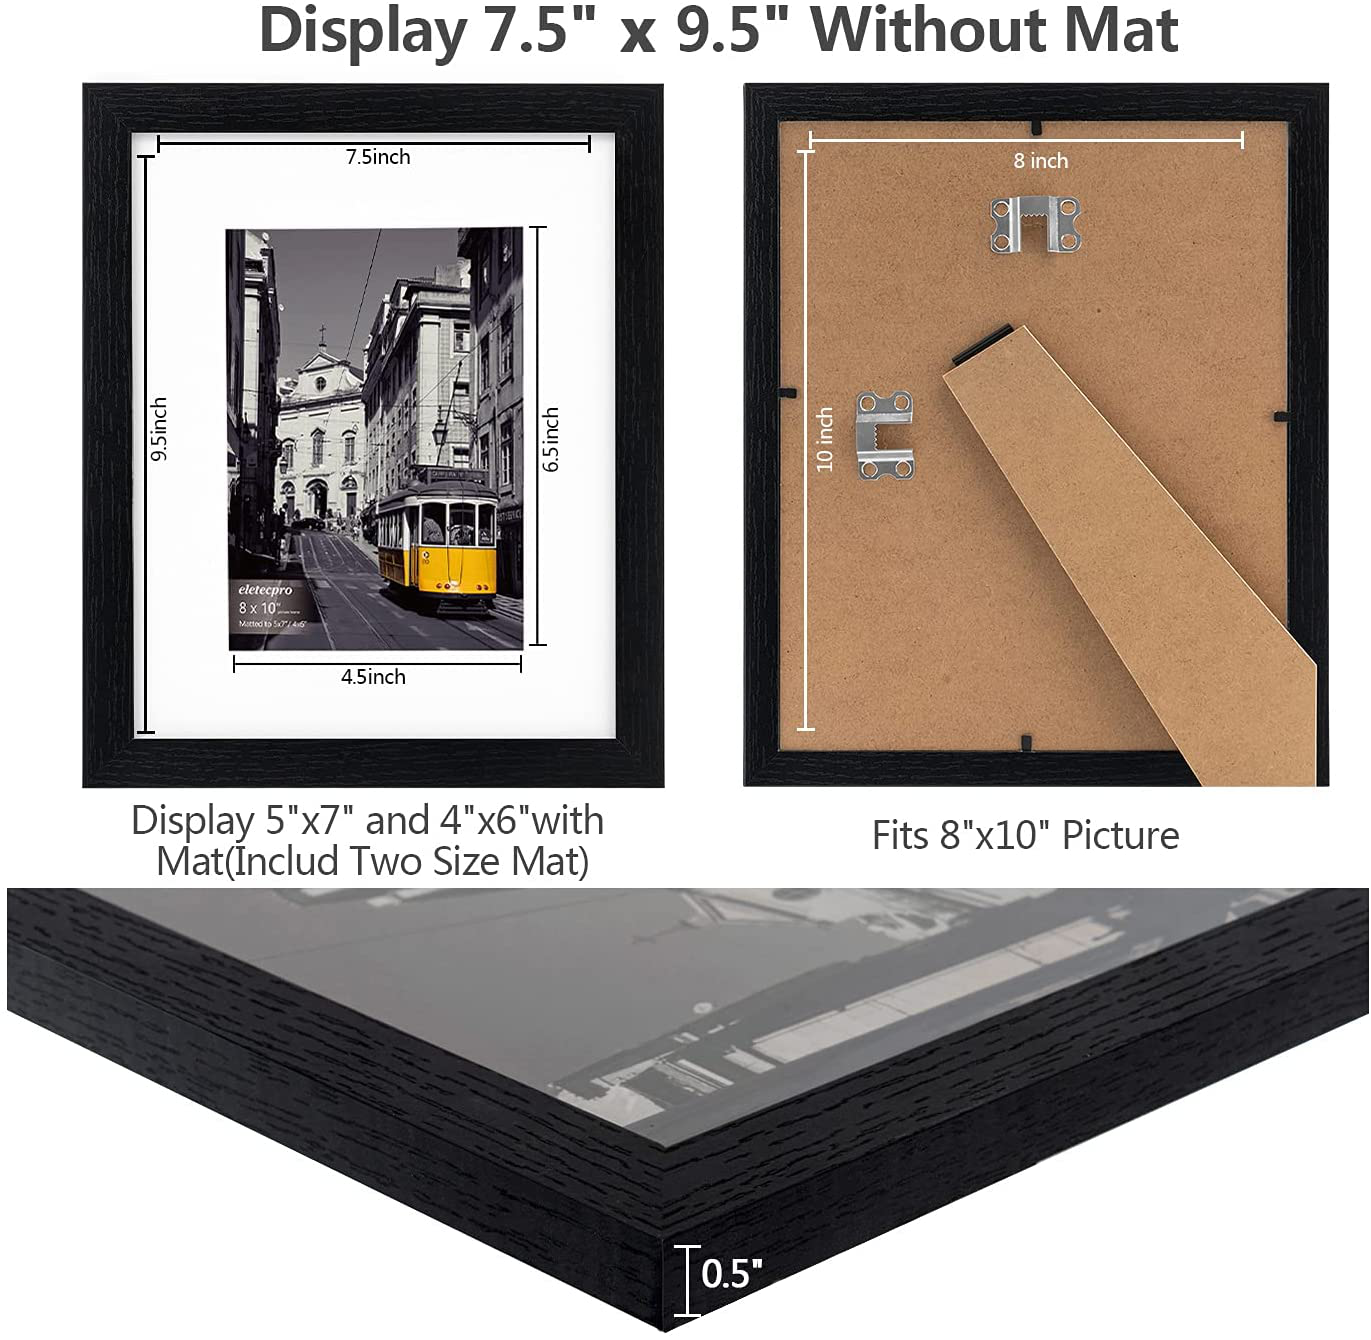 eletecpro 8x10 Picture Frames Set of 10, Display 4x6 or 5x7 Photo Frame with Mat or 8x10 Without Mat, Wall Gallery Photo Frames, Table Top Display or Wall Mounting (Black, 8x10)